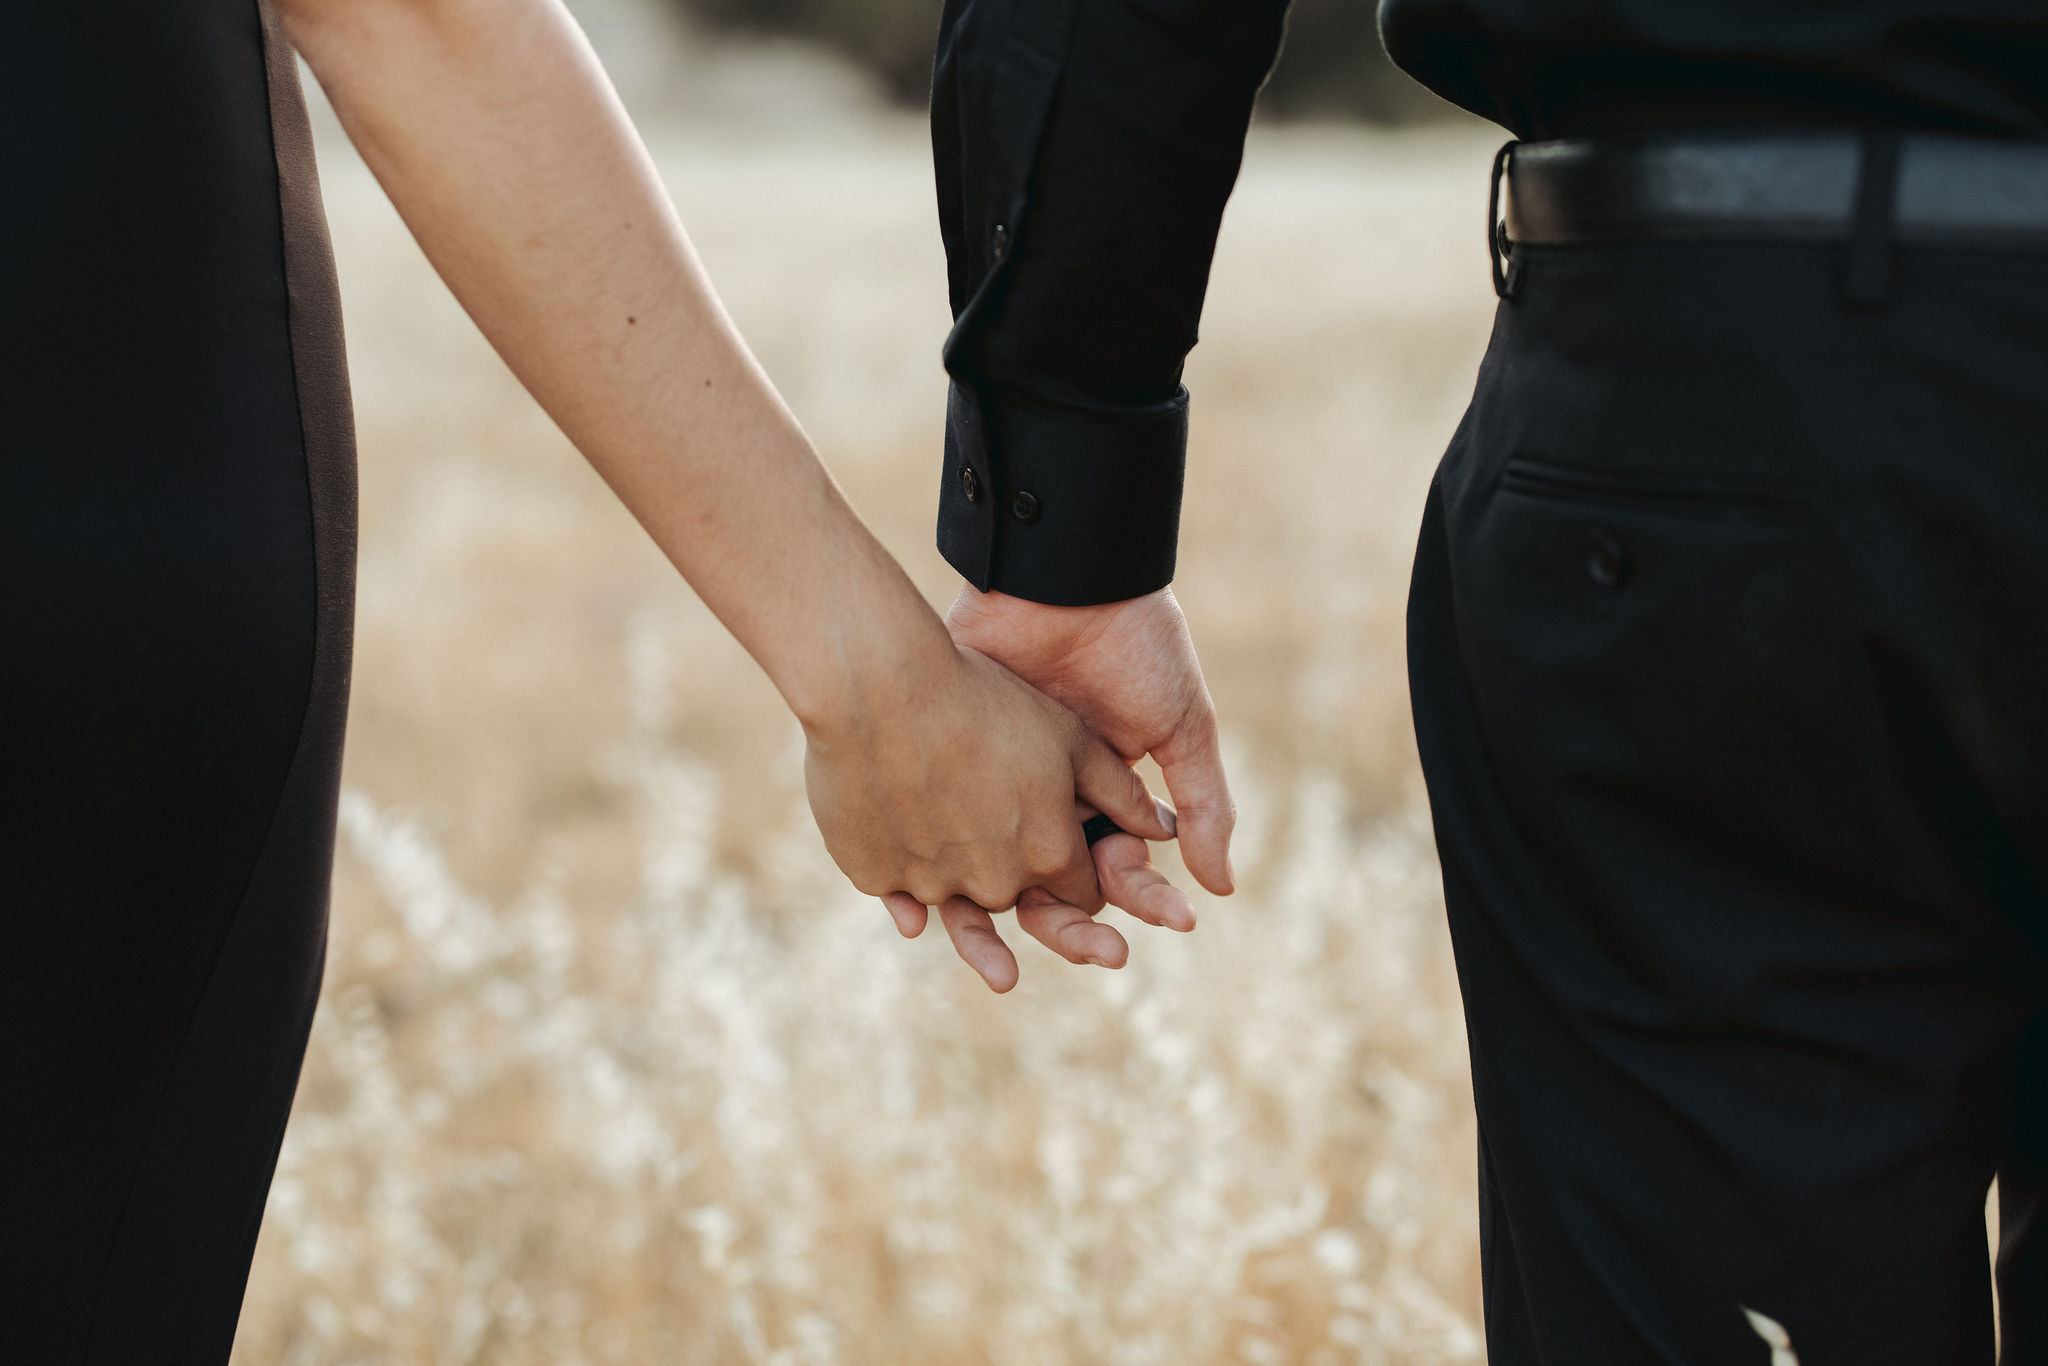 couple holding hands in a field